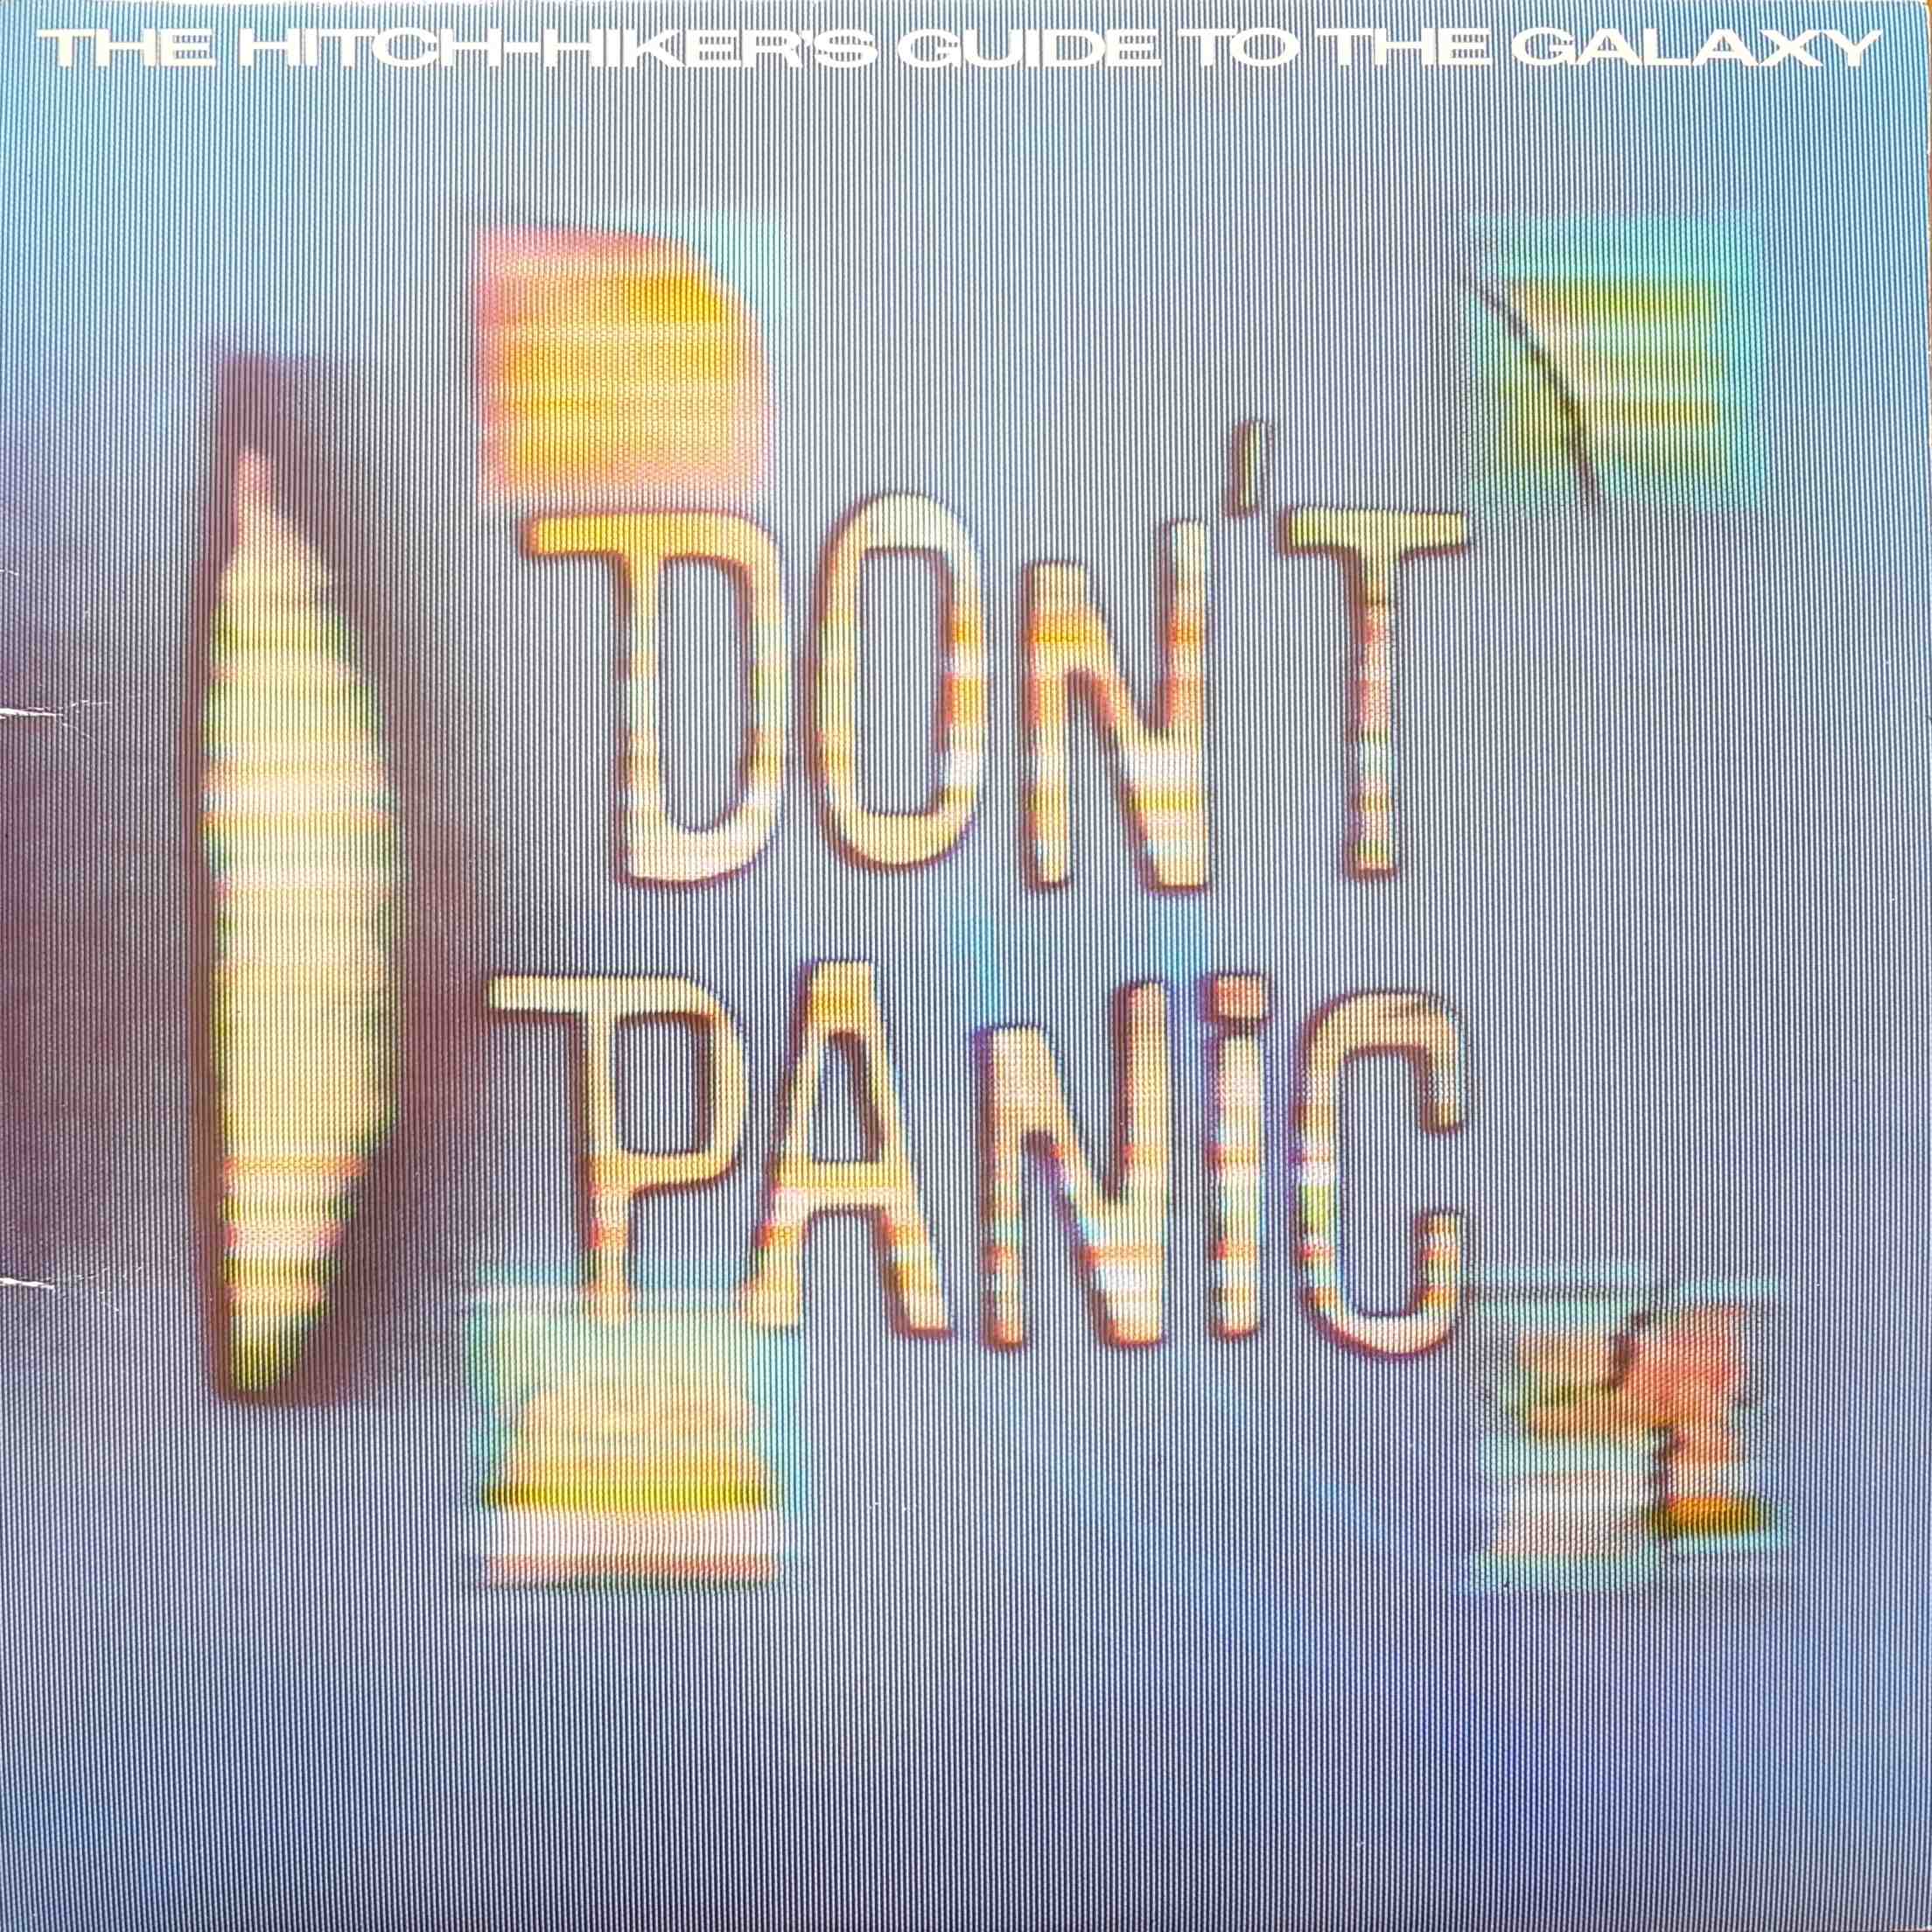 Picture of The hitchhiker's guide to the Galaxy by artist Douglas Adams from the BBC albums - Records and Tapes library